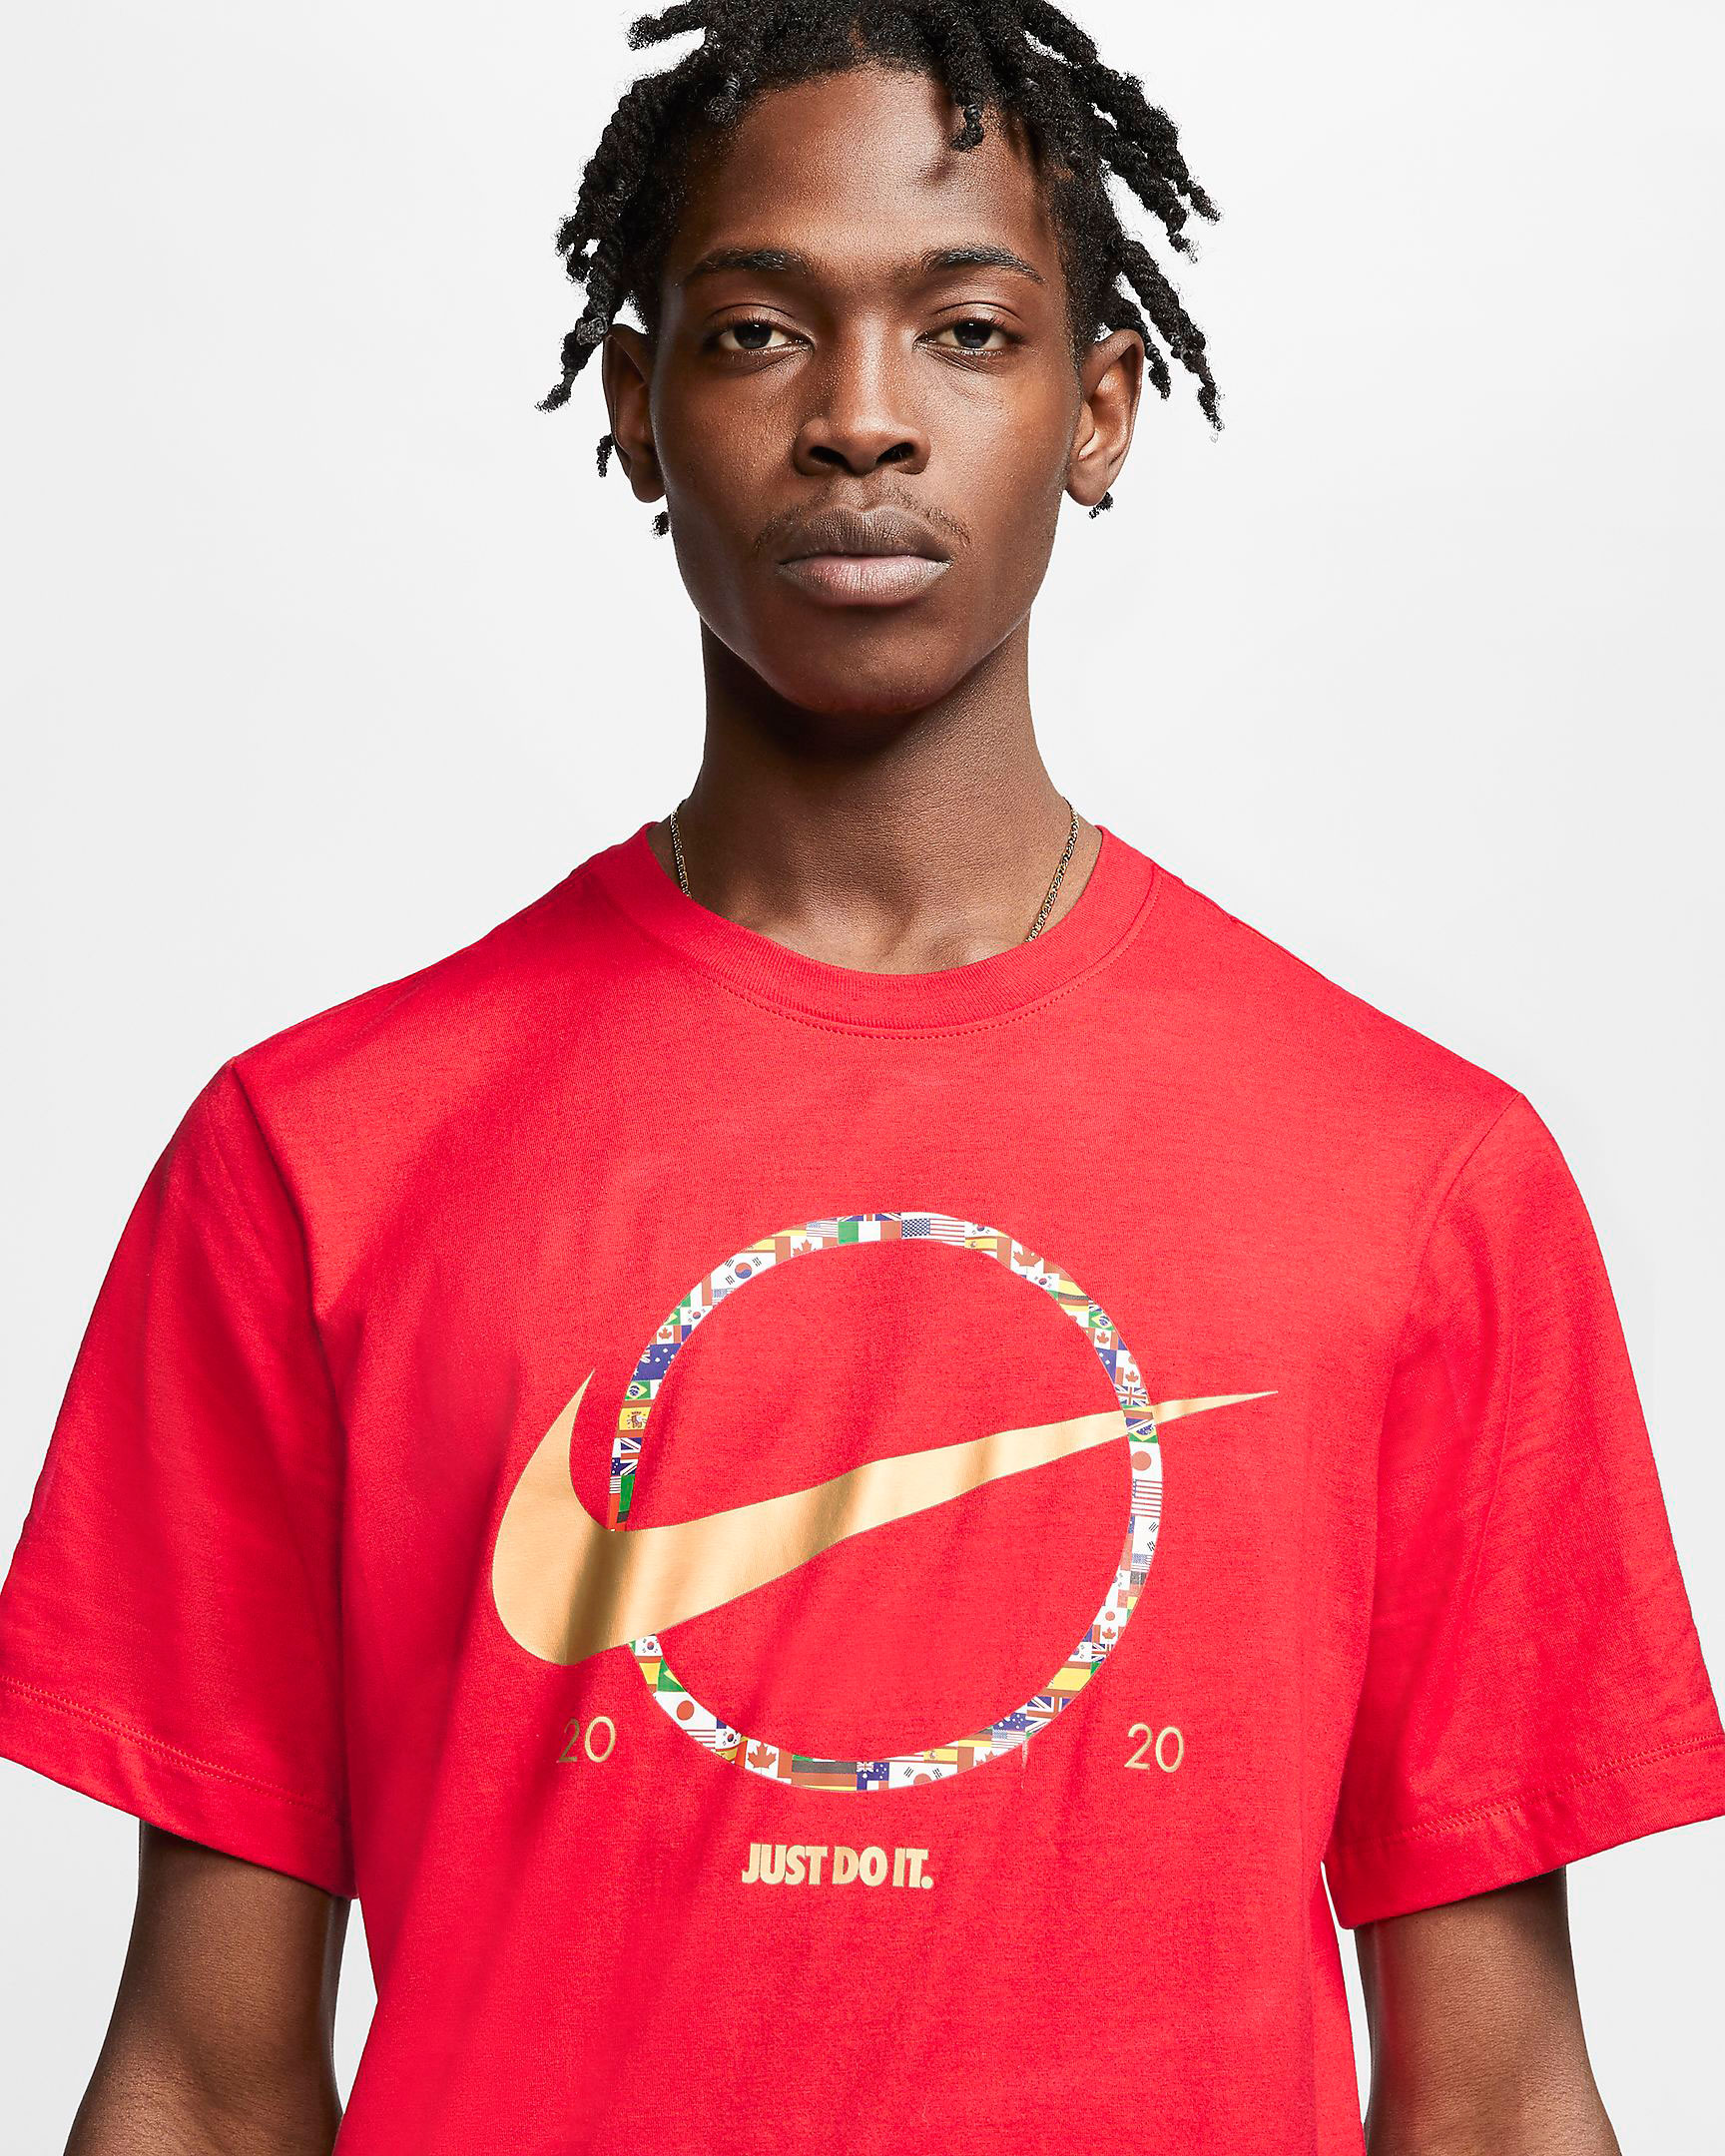 gold and red nike shirt